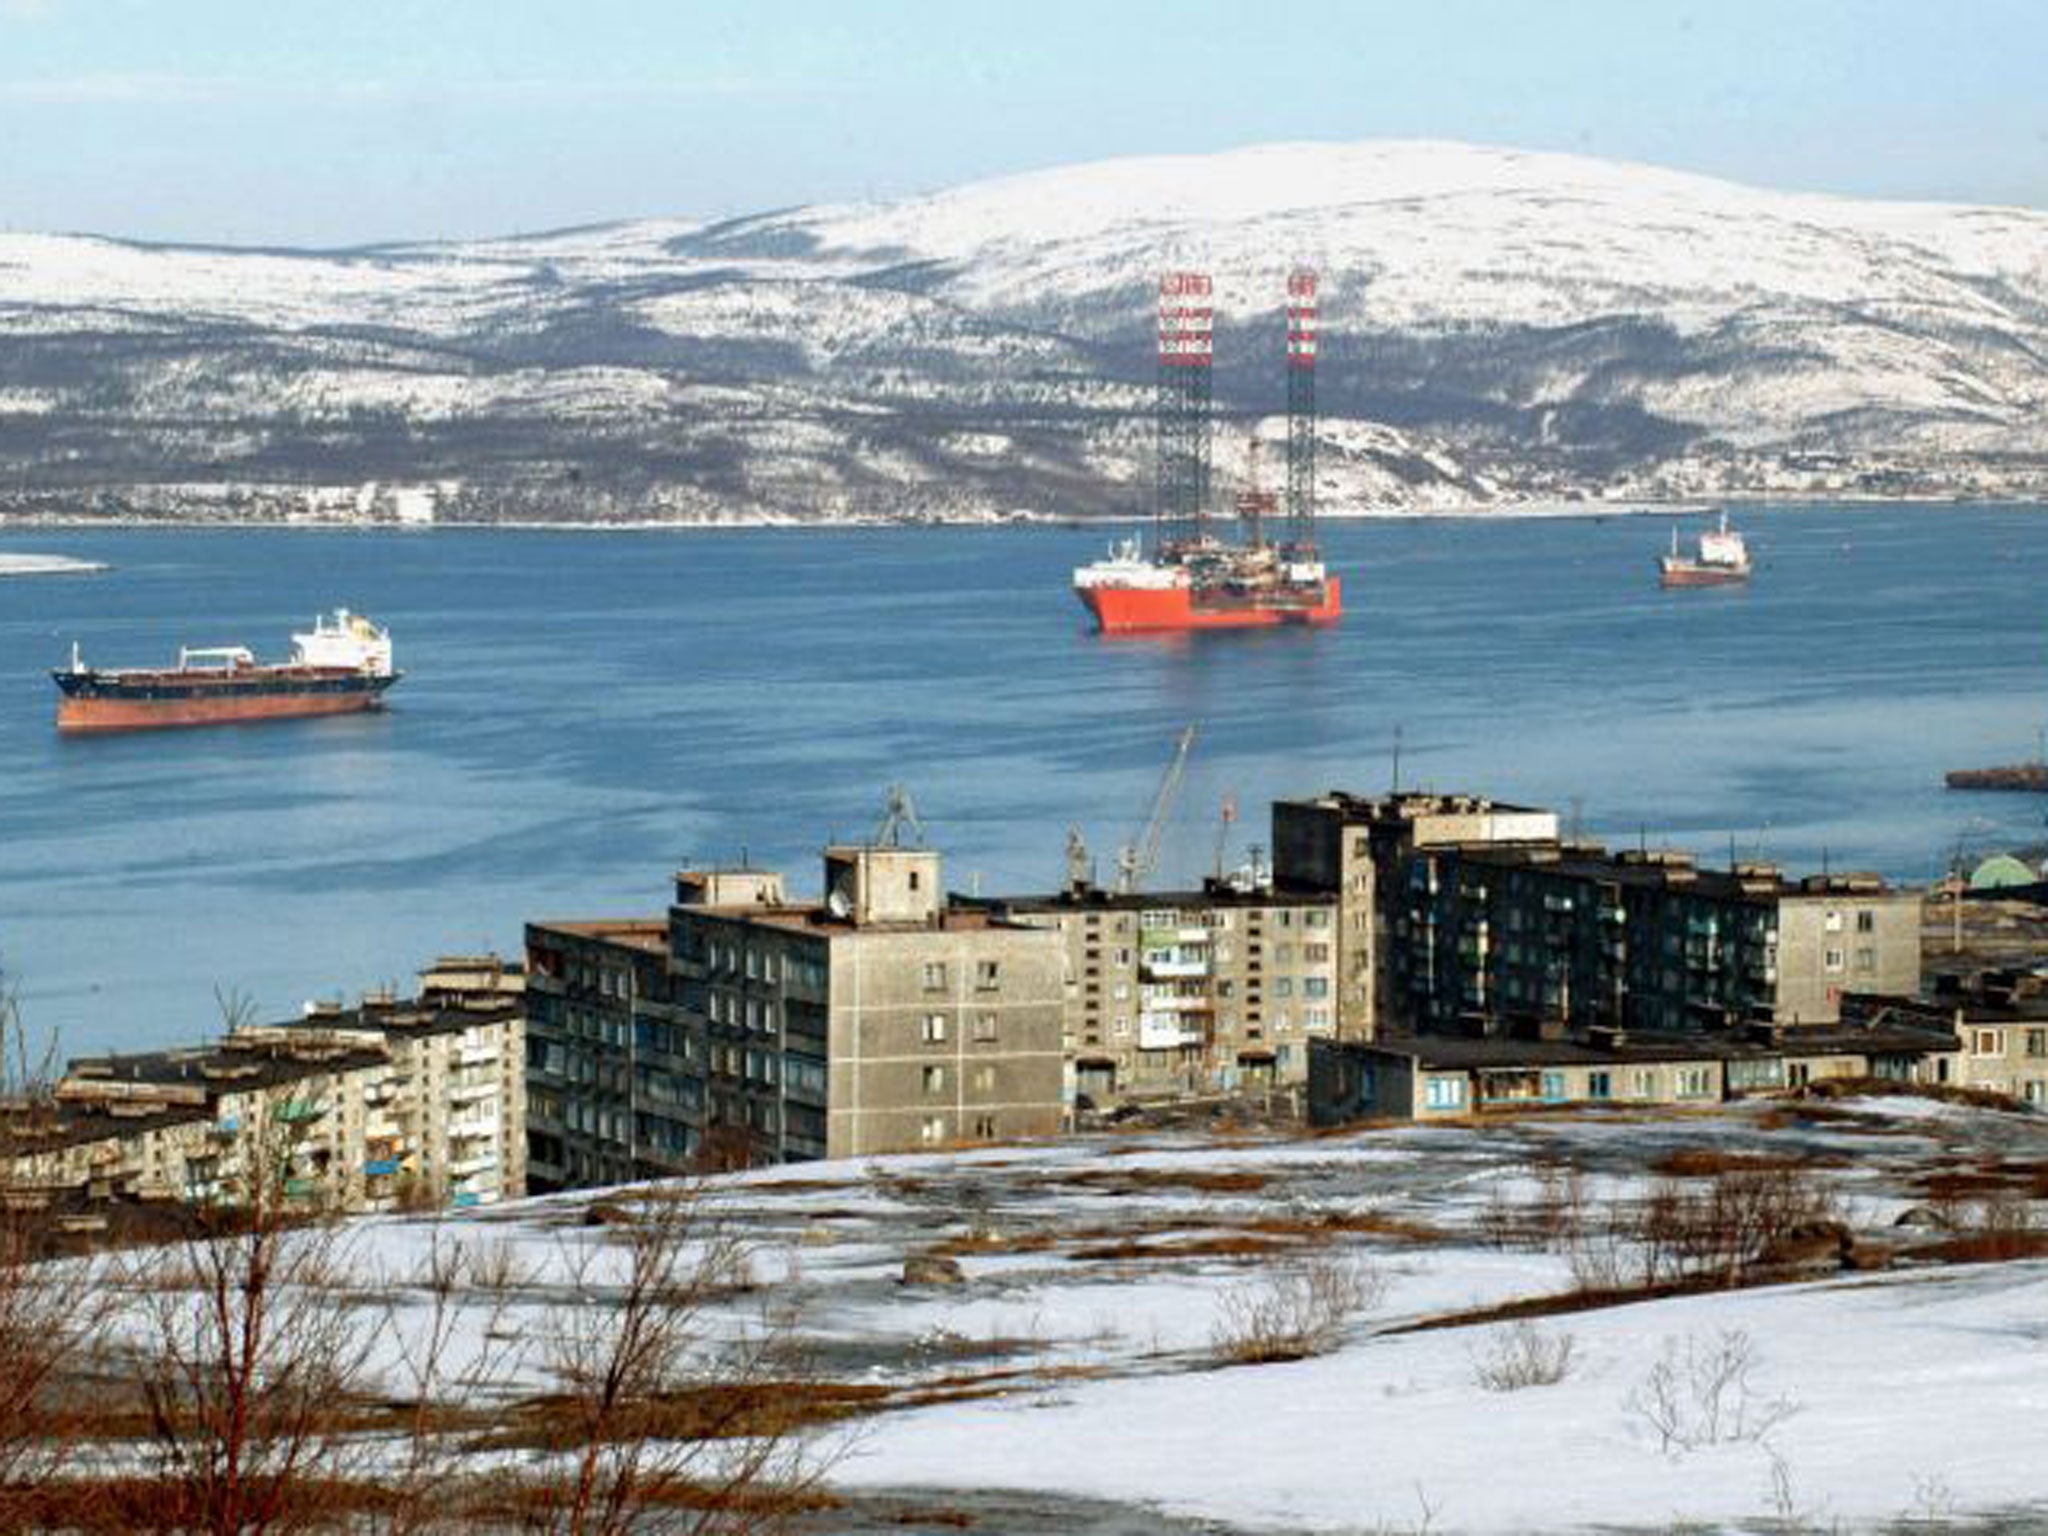 Murmansk, in northern Russia, where the incident took place